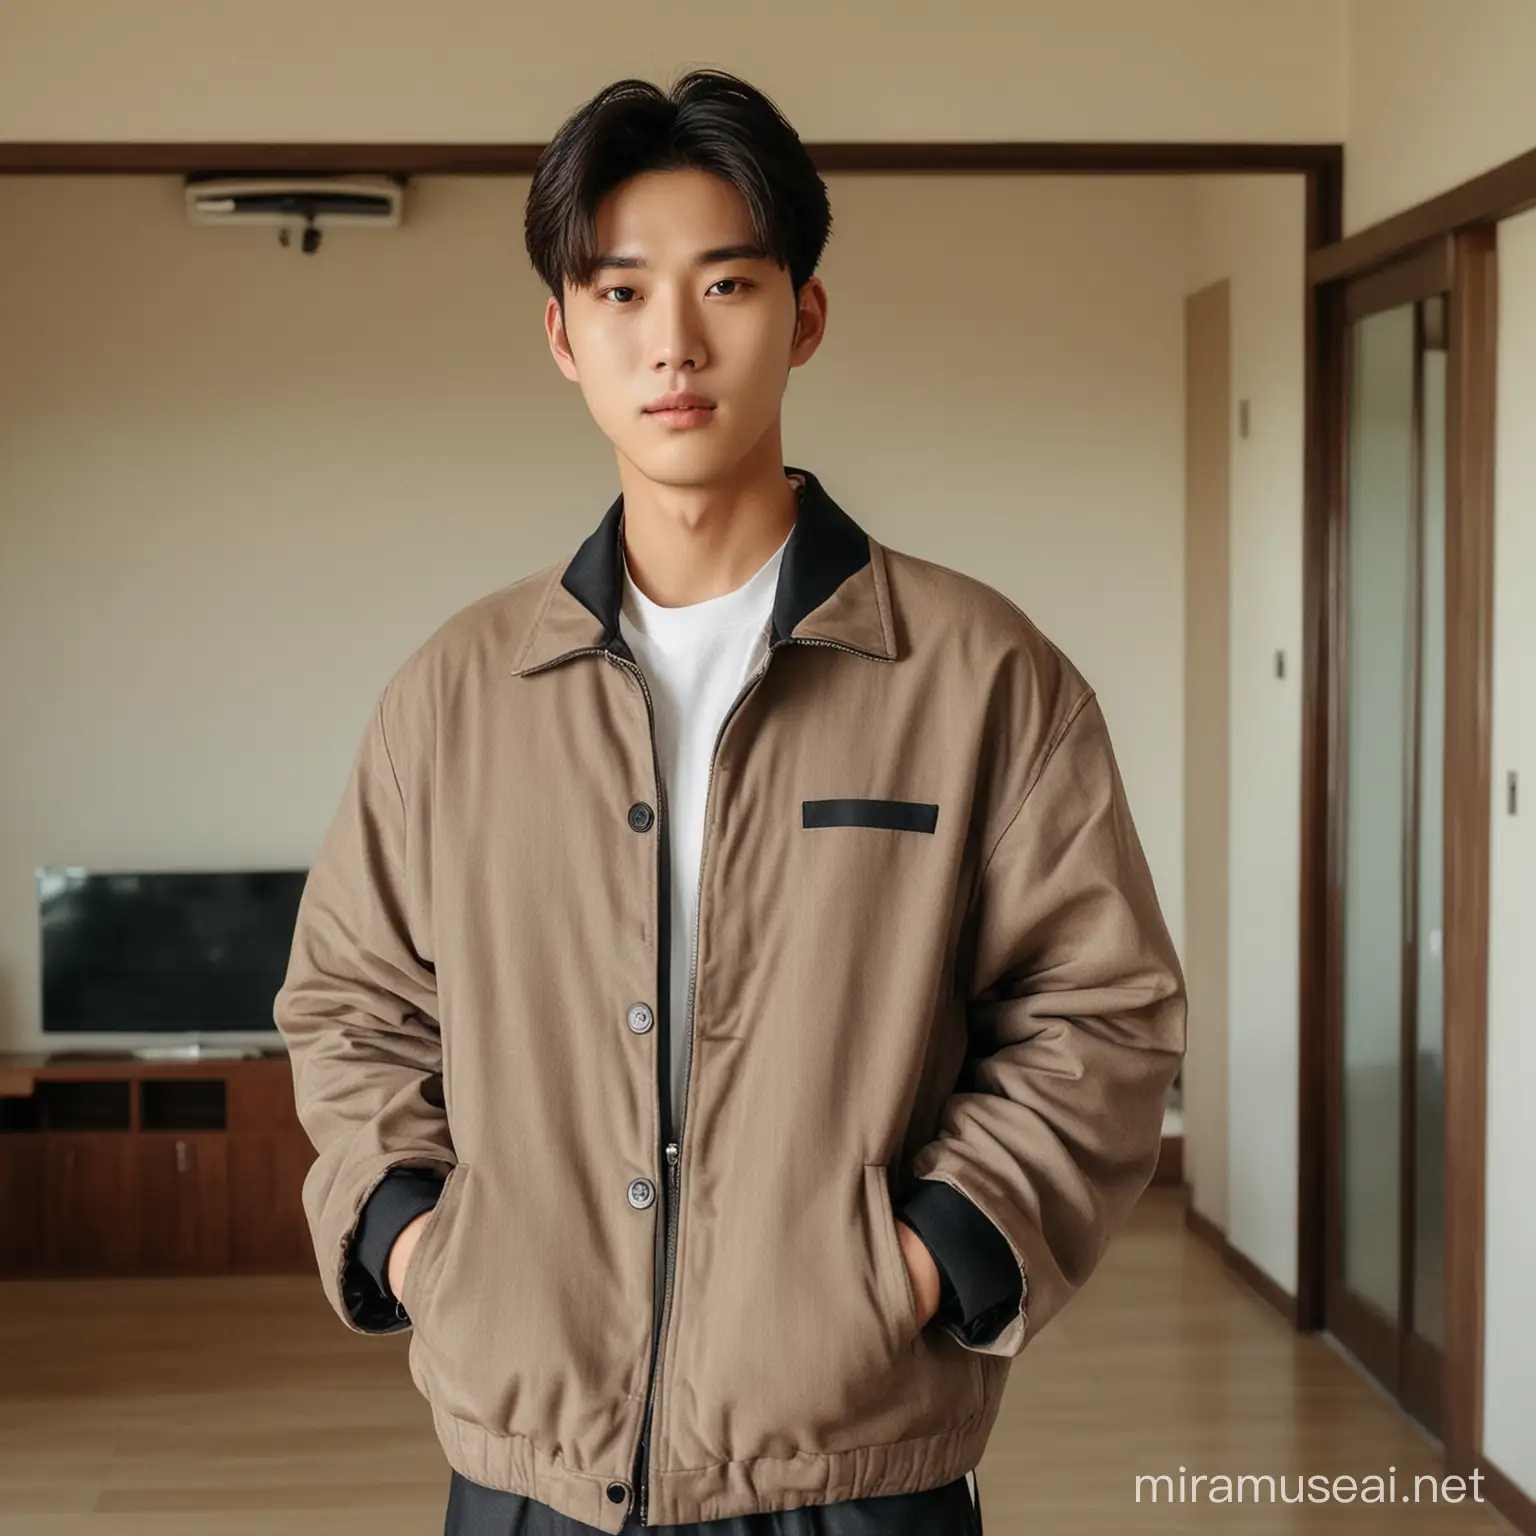 Stylish Young Korean Man in Neat Jacket Inside House